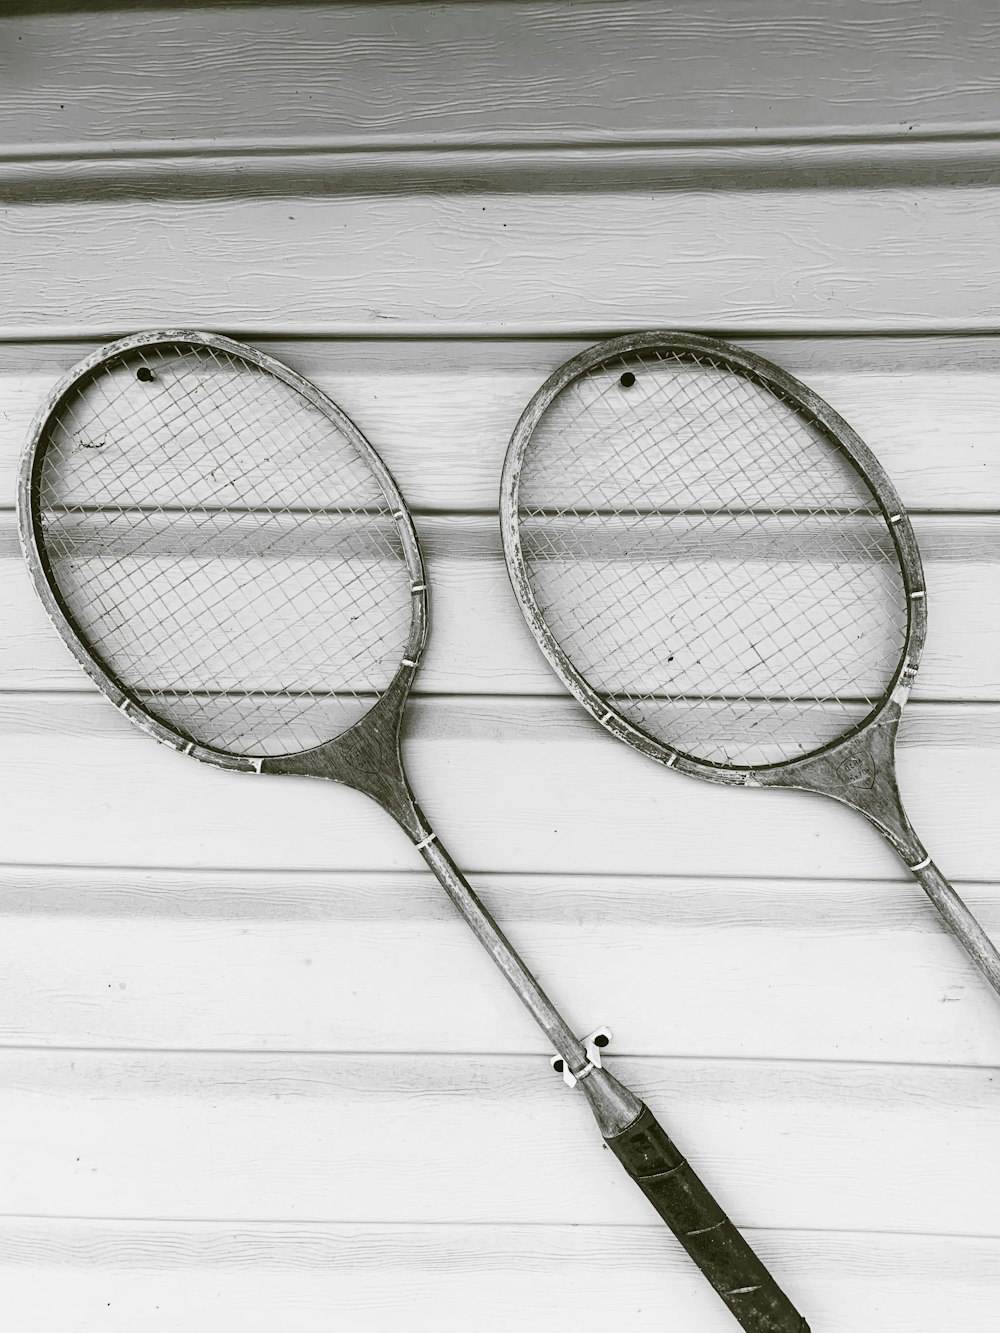 two gray badminton rackets on white wooden surface